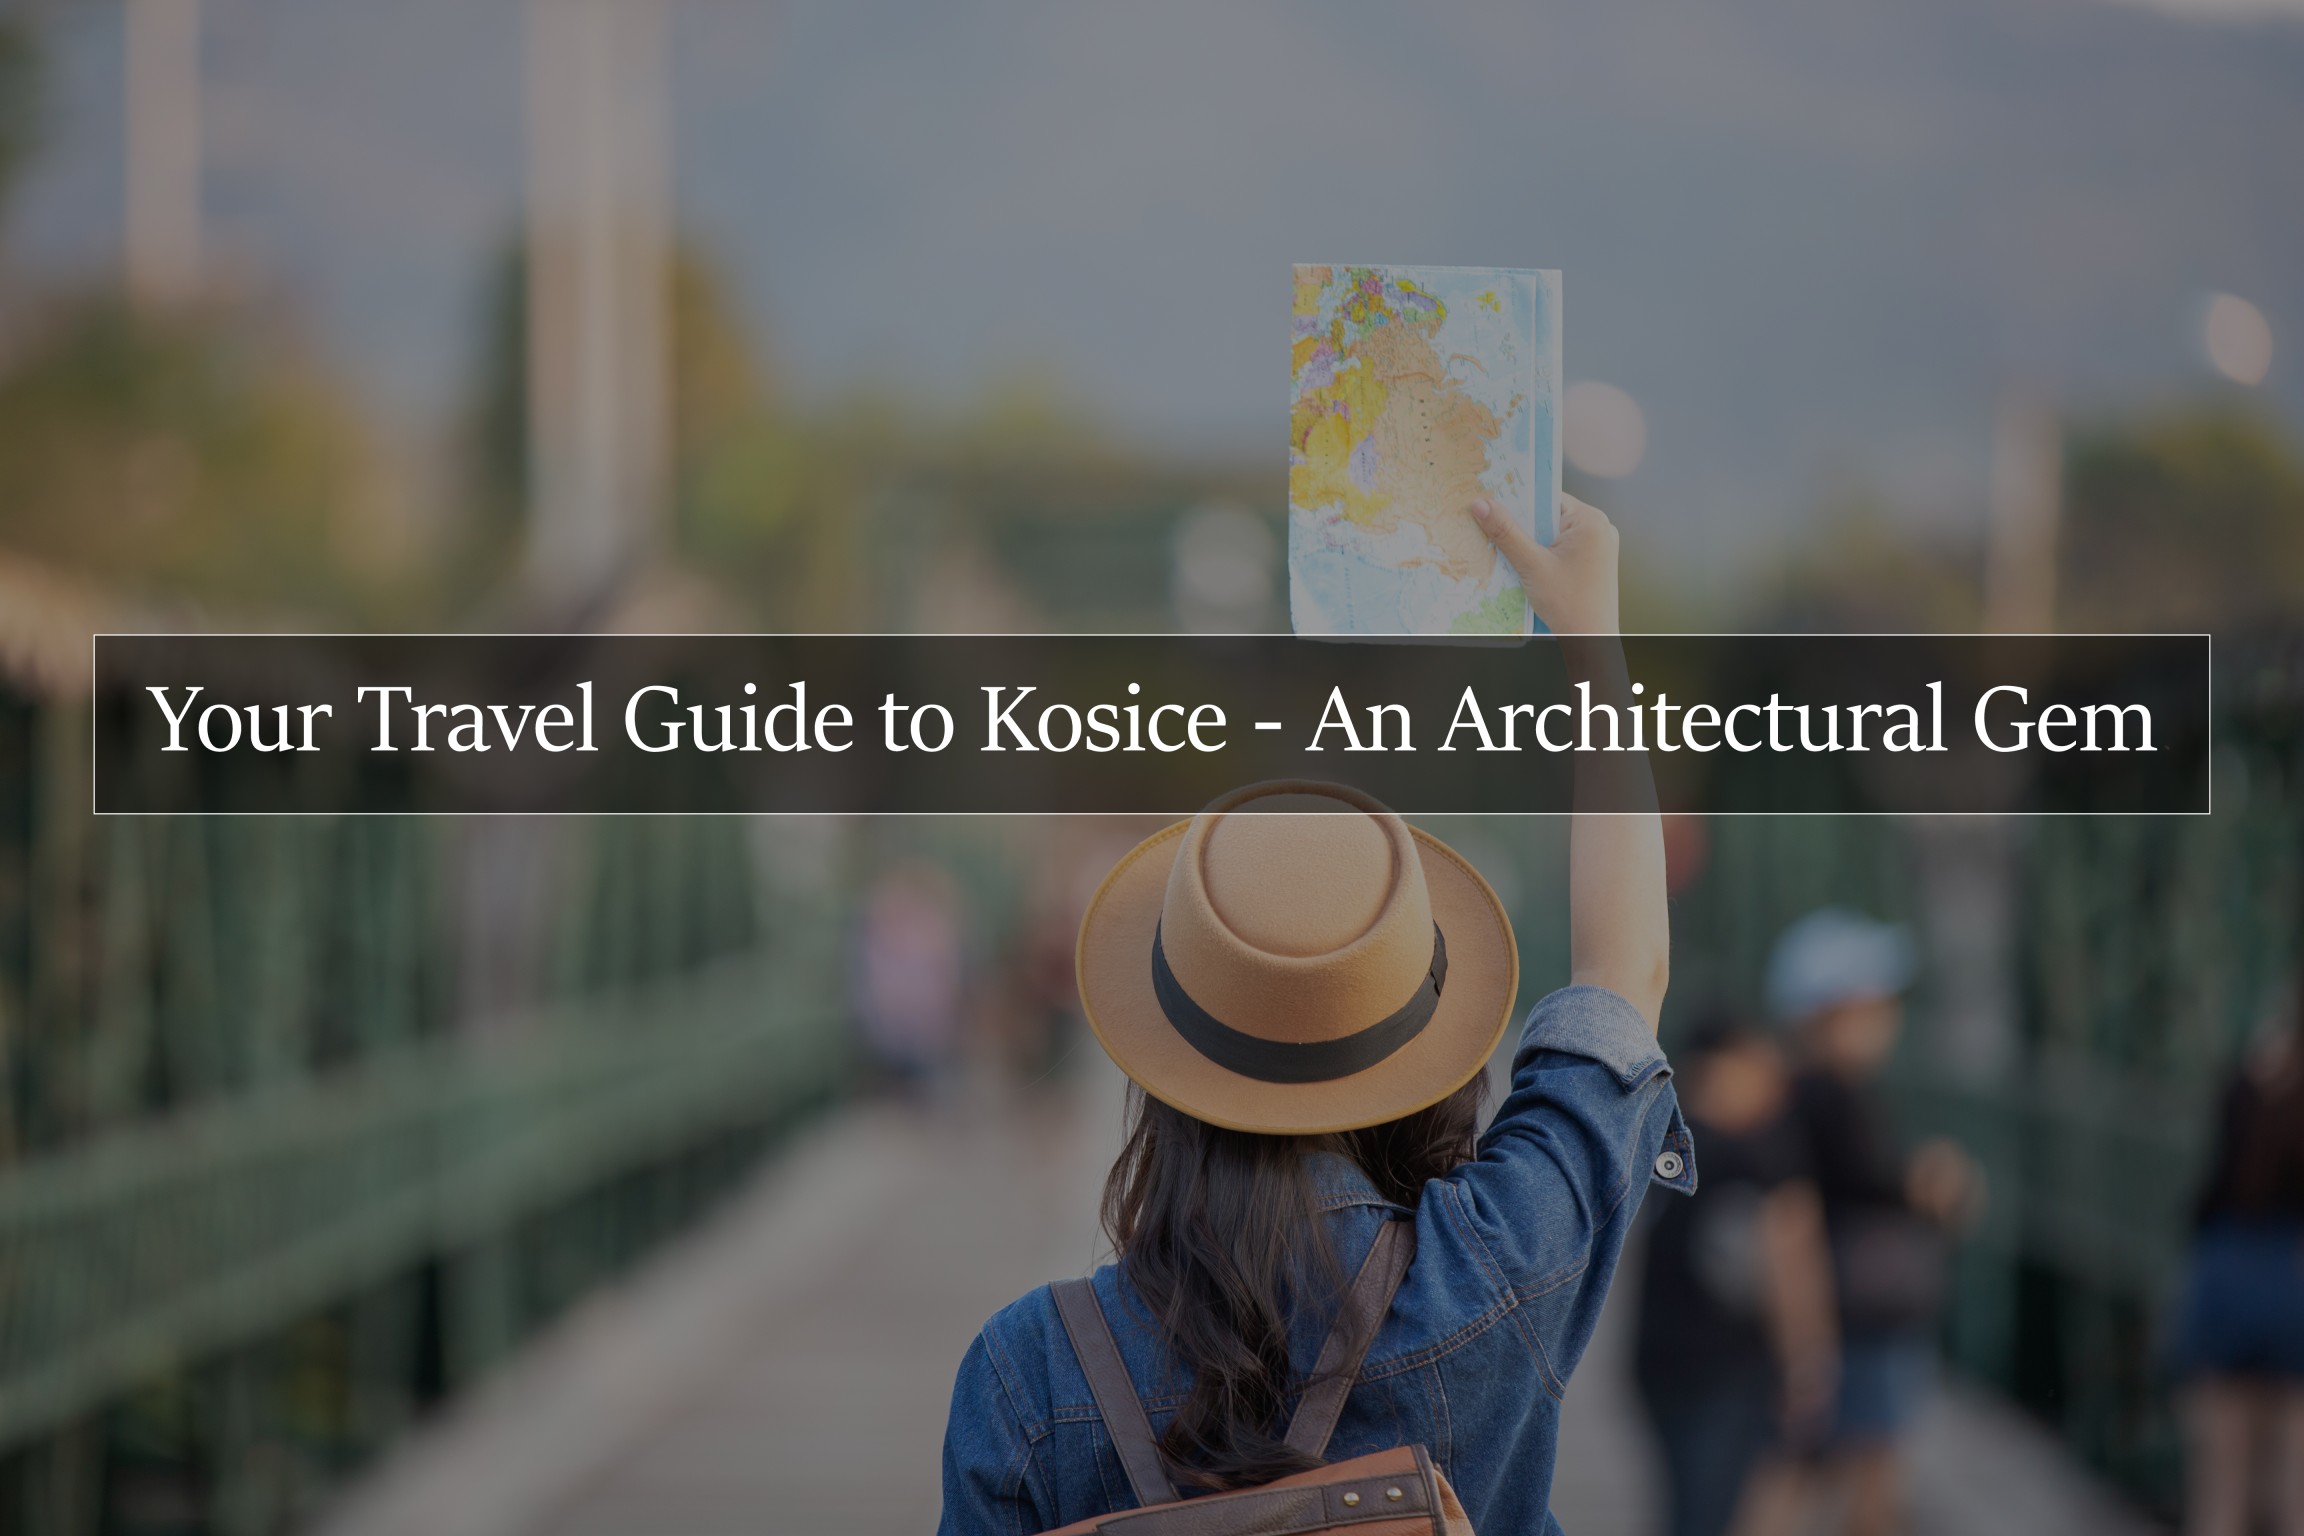 Your Travel Guide to Kosice - An Architectural Gem